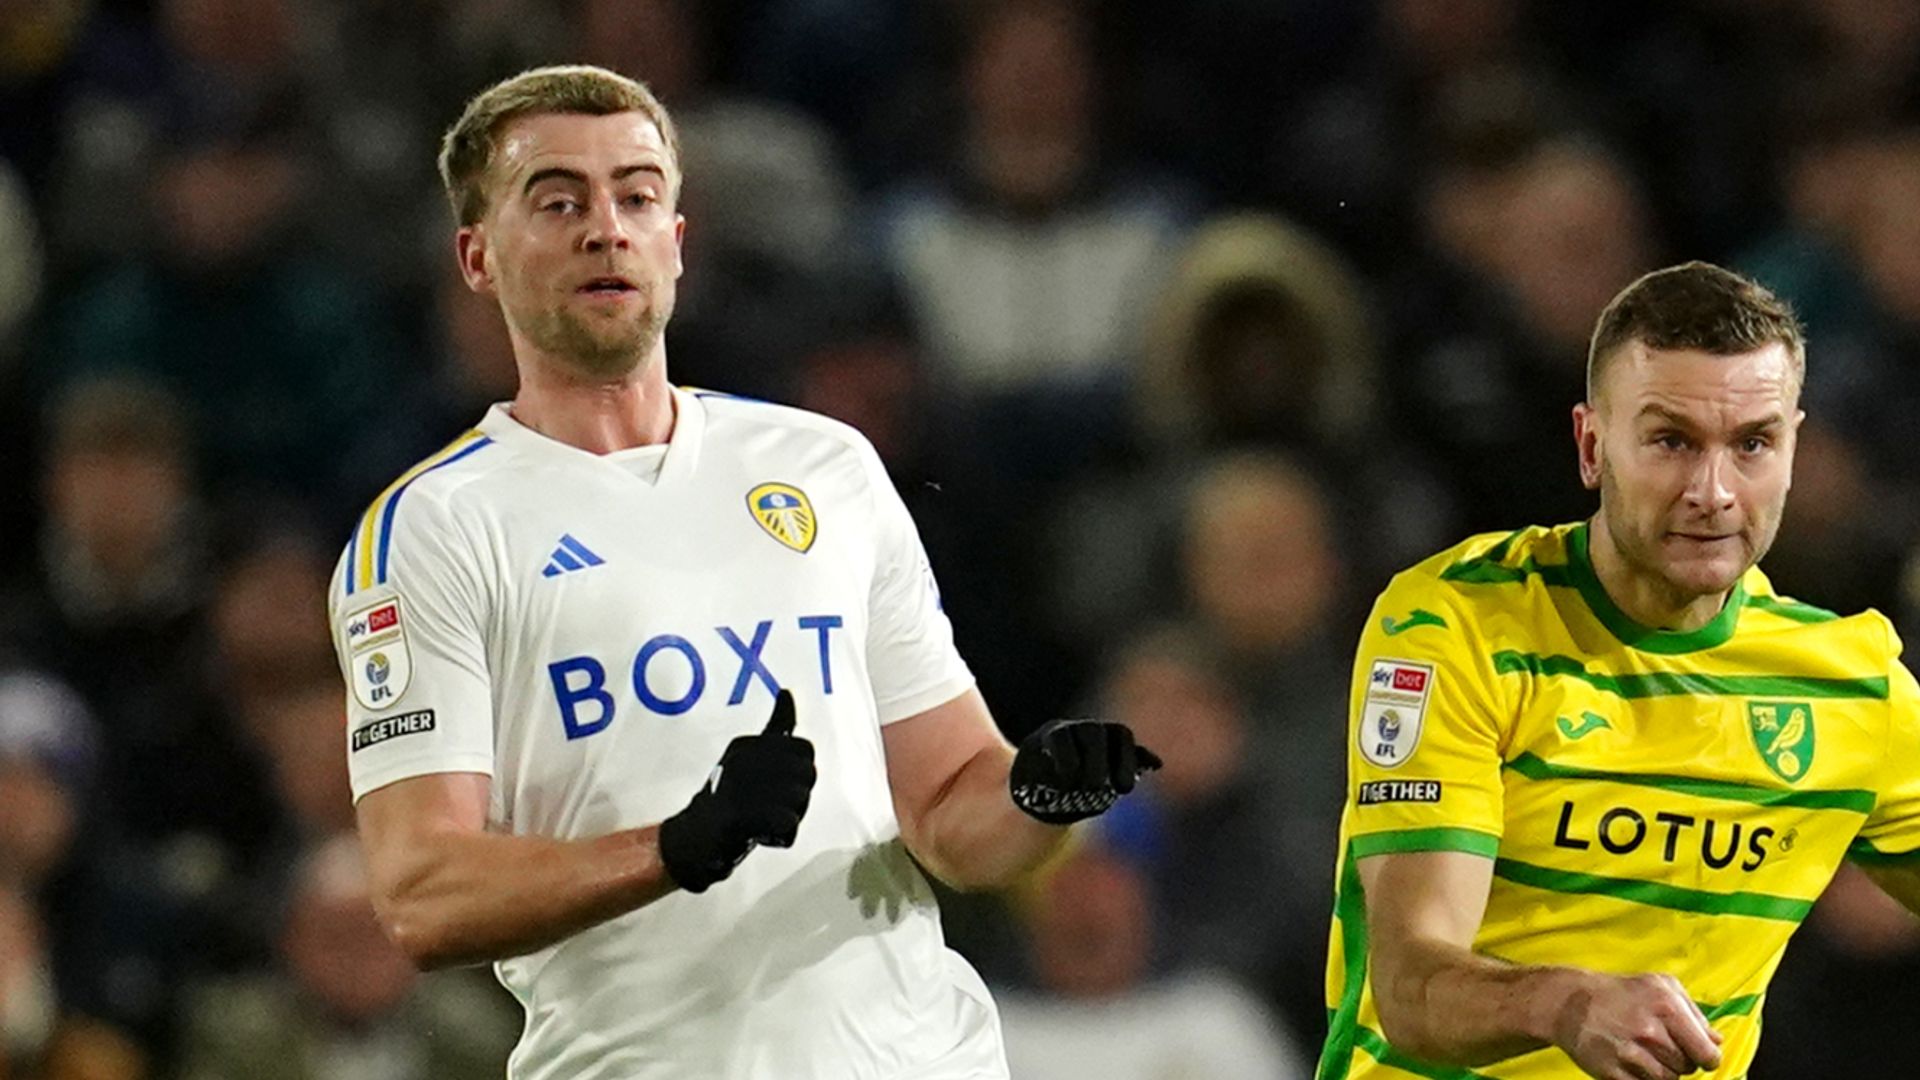 Leeds hold on against Norwich to close in on automatic spots